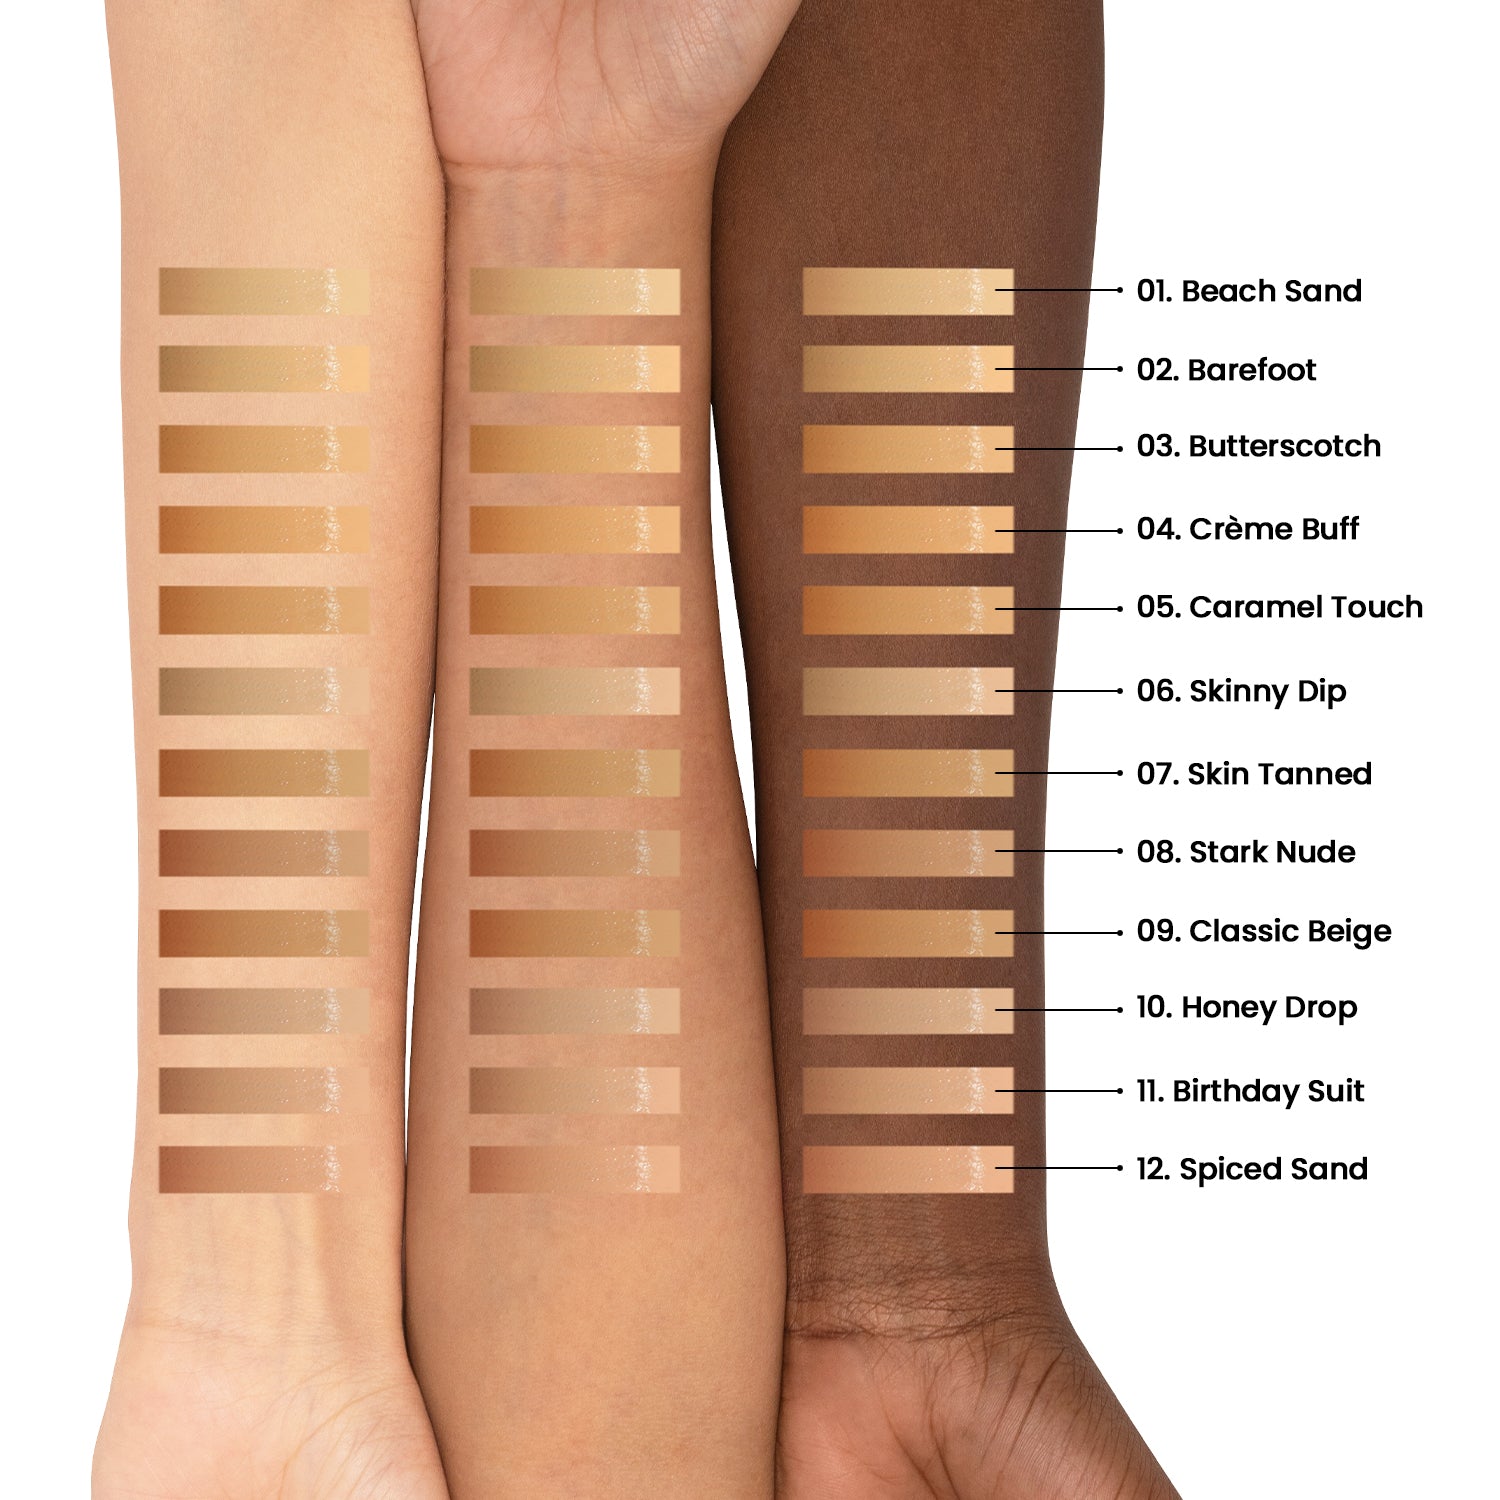 PAC Cosmetics Take Cover Concealer (6.8 gm) #Color_Twisted Toffee